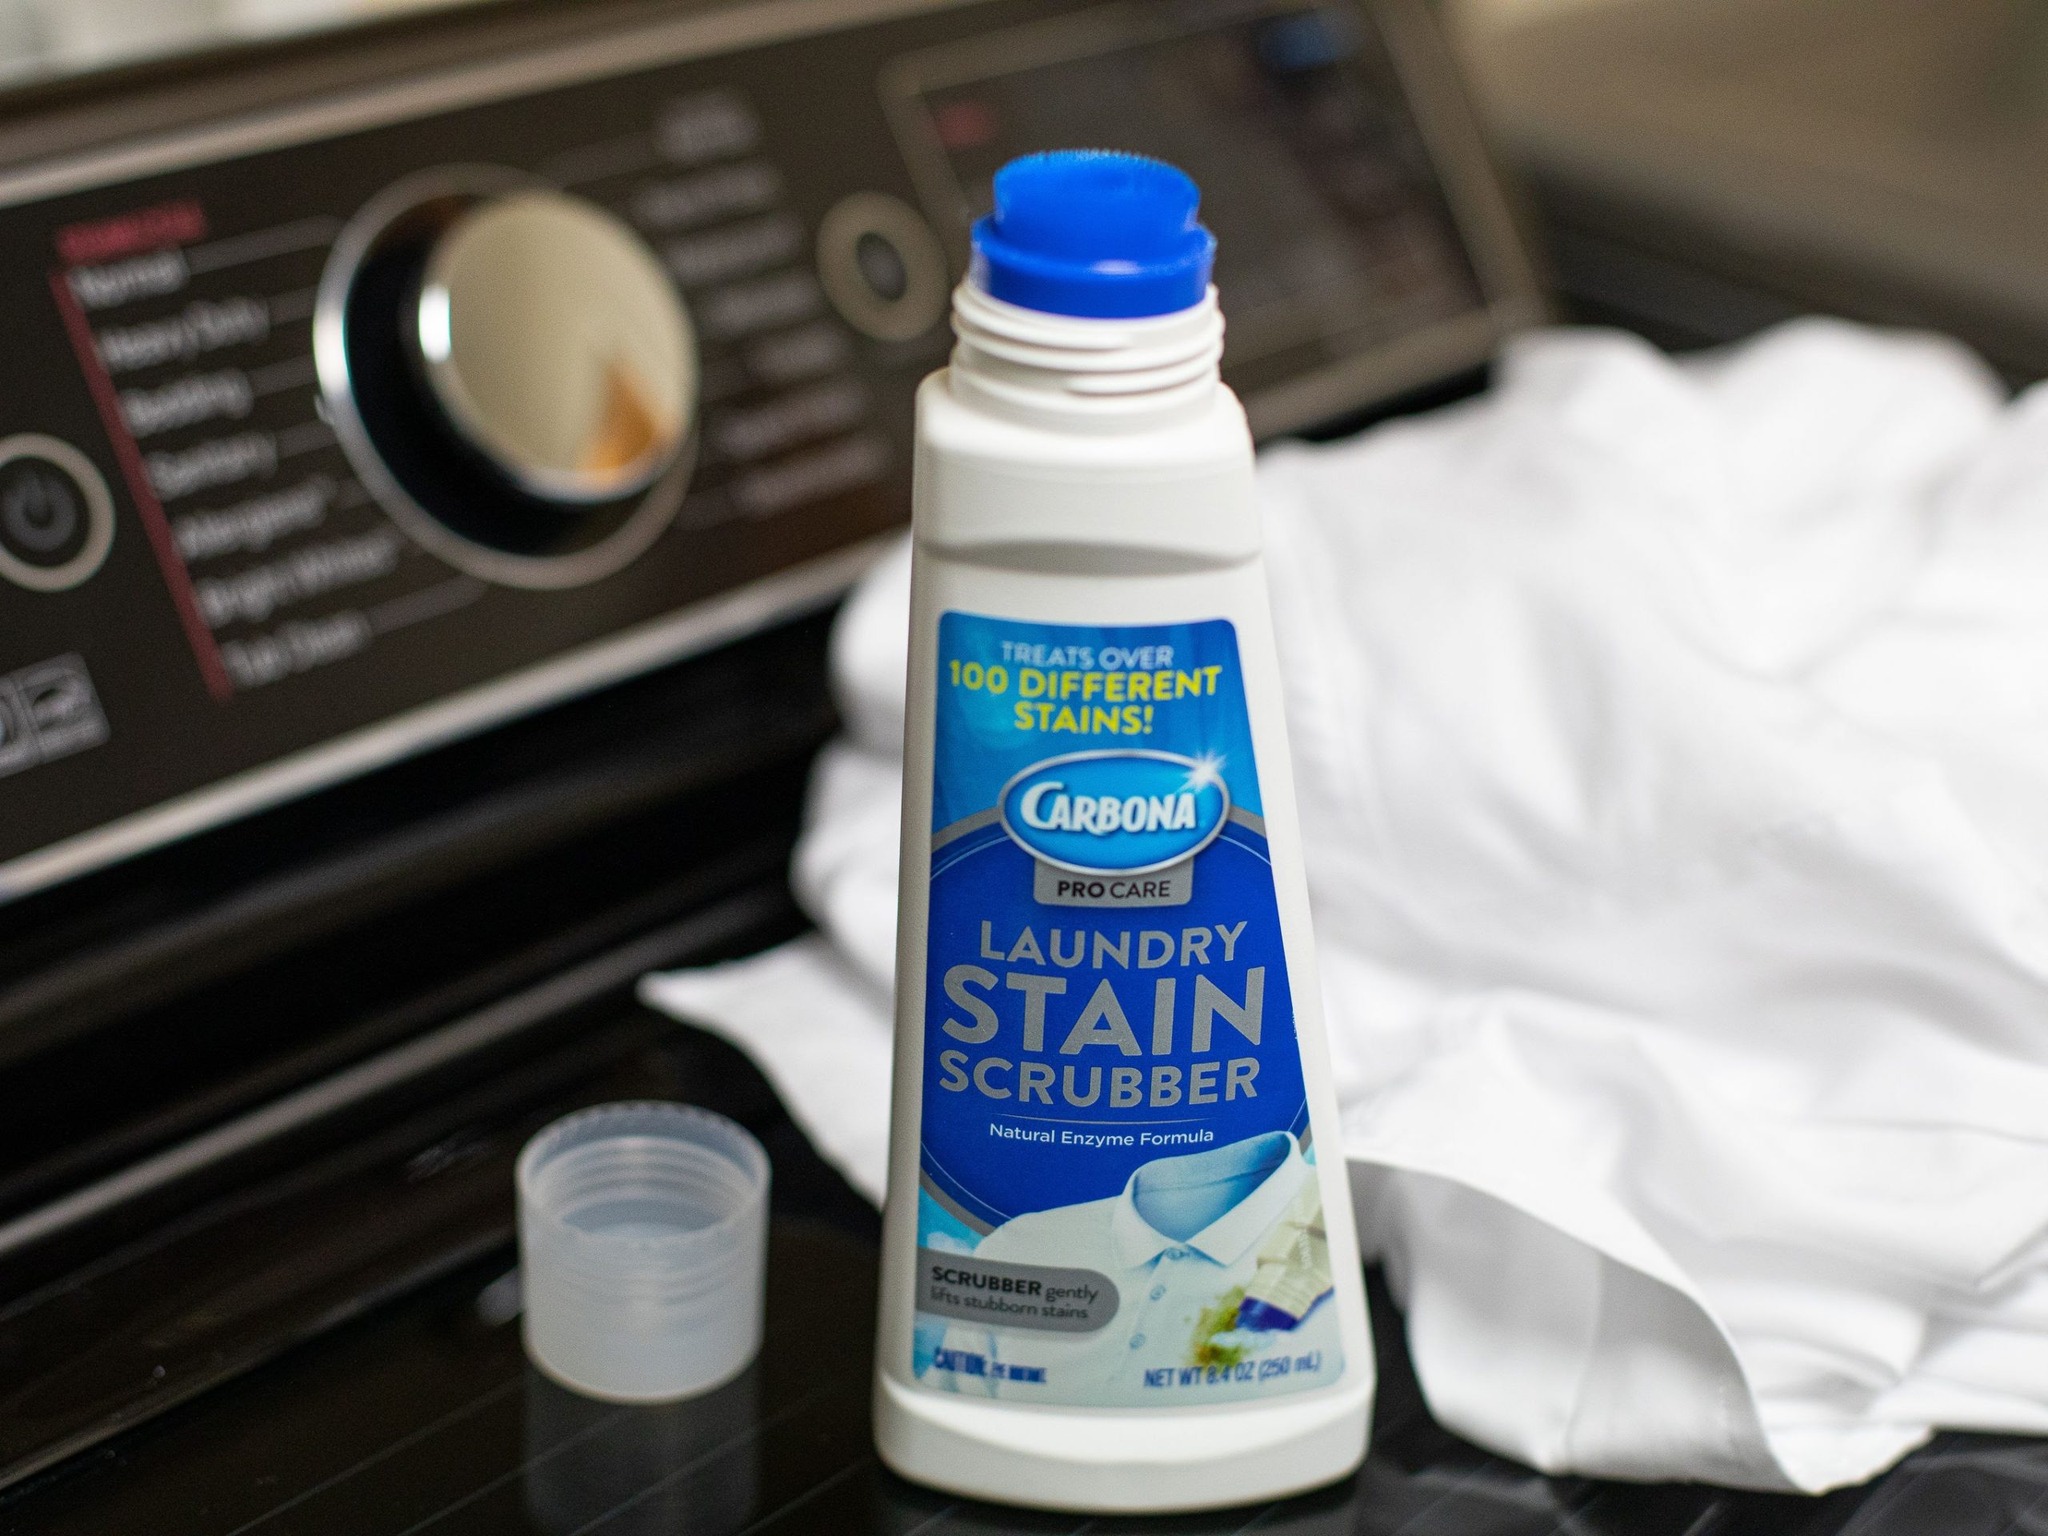 Carbona Pro Care Laundry Stain Scrubber As Low As 90¢ At Publix -  iHeartPublix